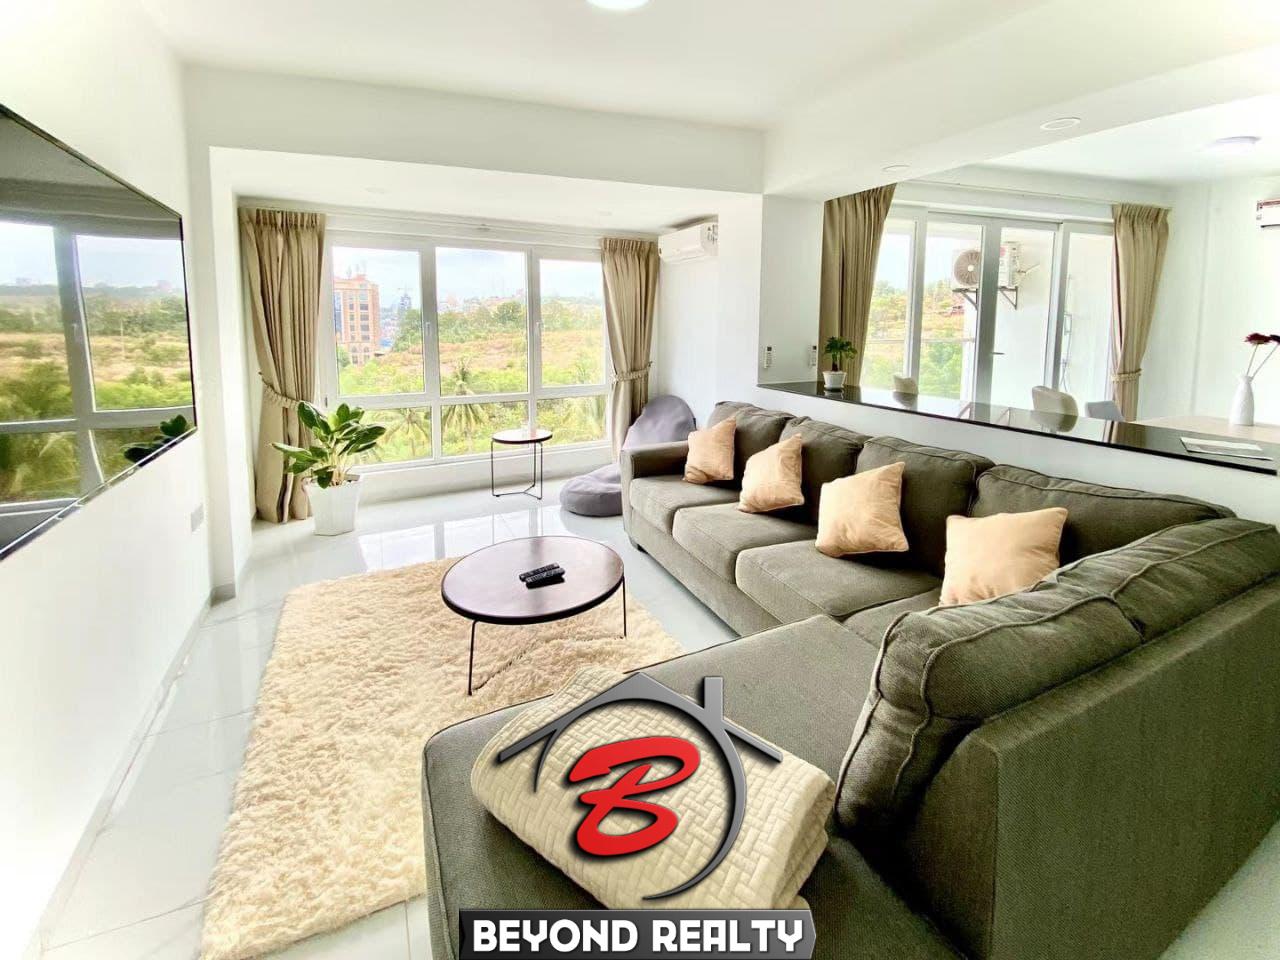 the living room of the 2br luxury condo unit resale CVIK 2 in Sangkat 4 Sihanoukville Cambodia